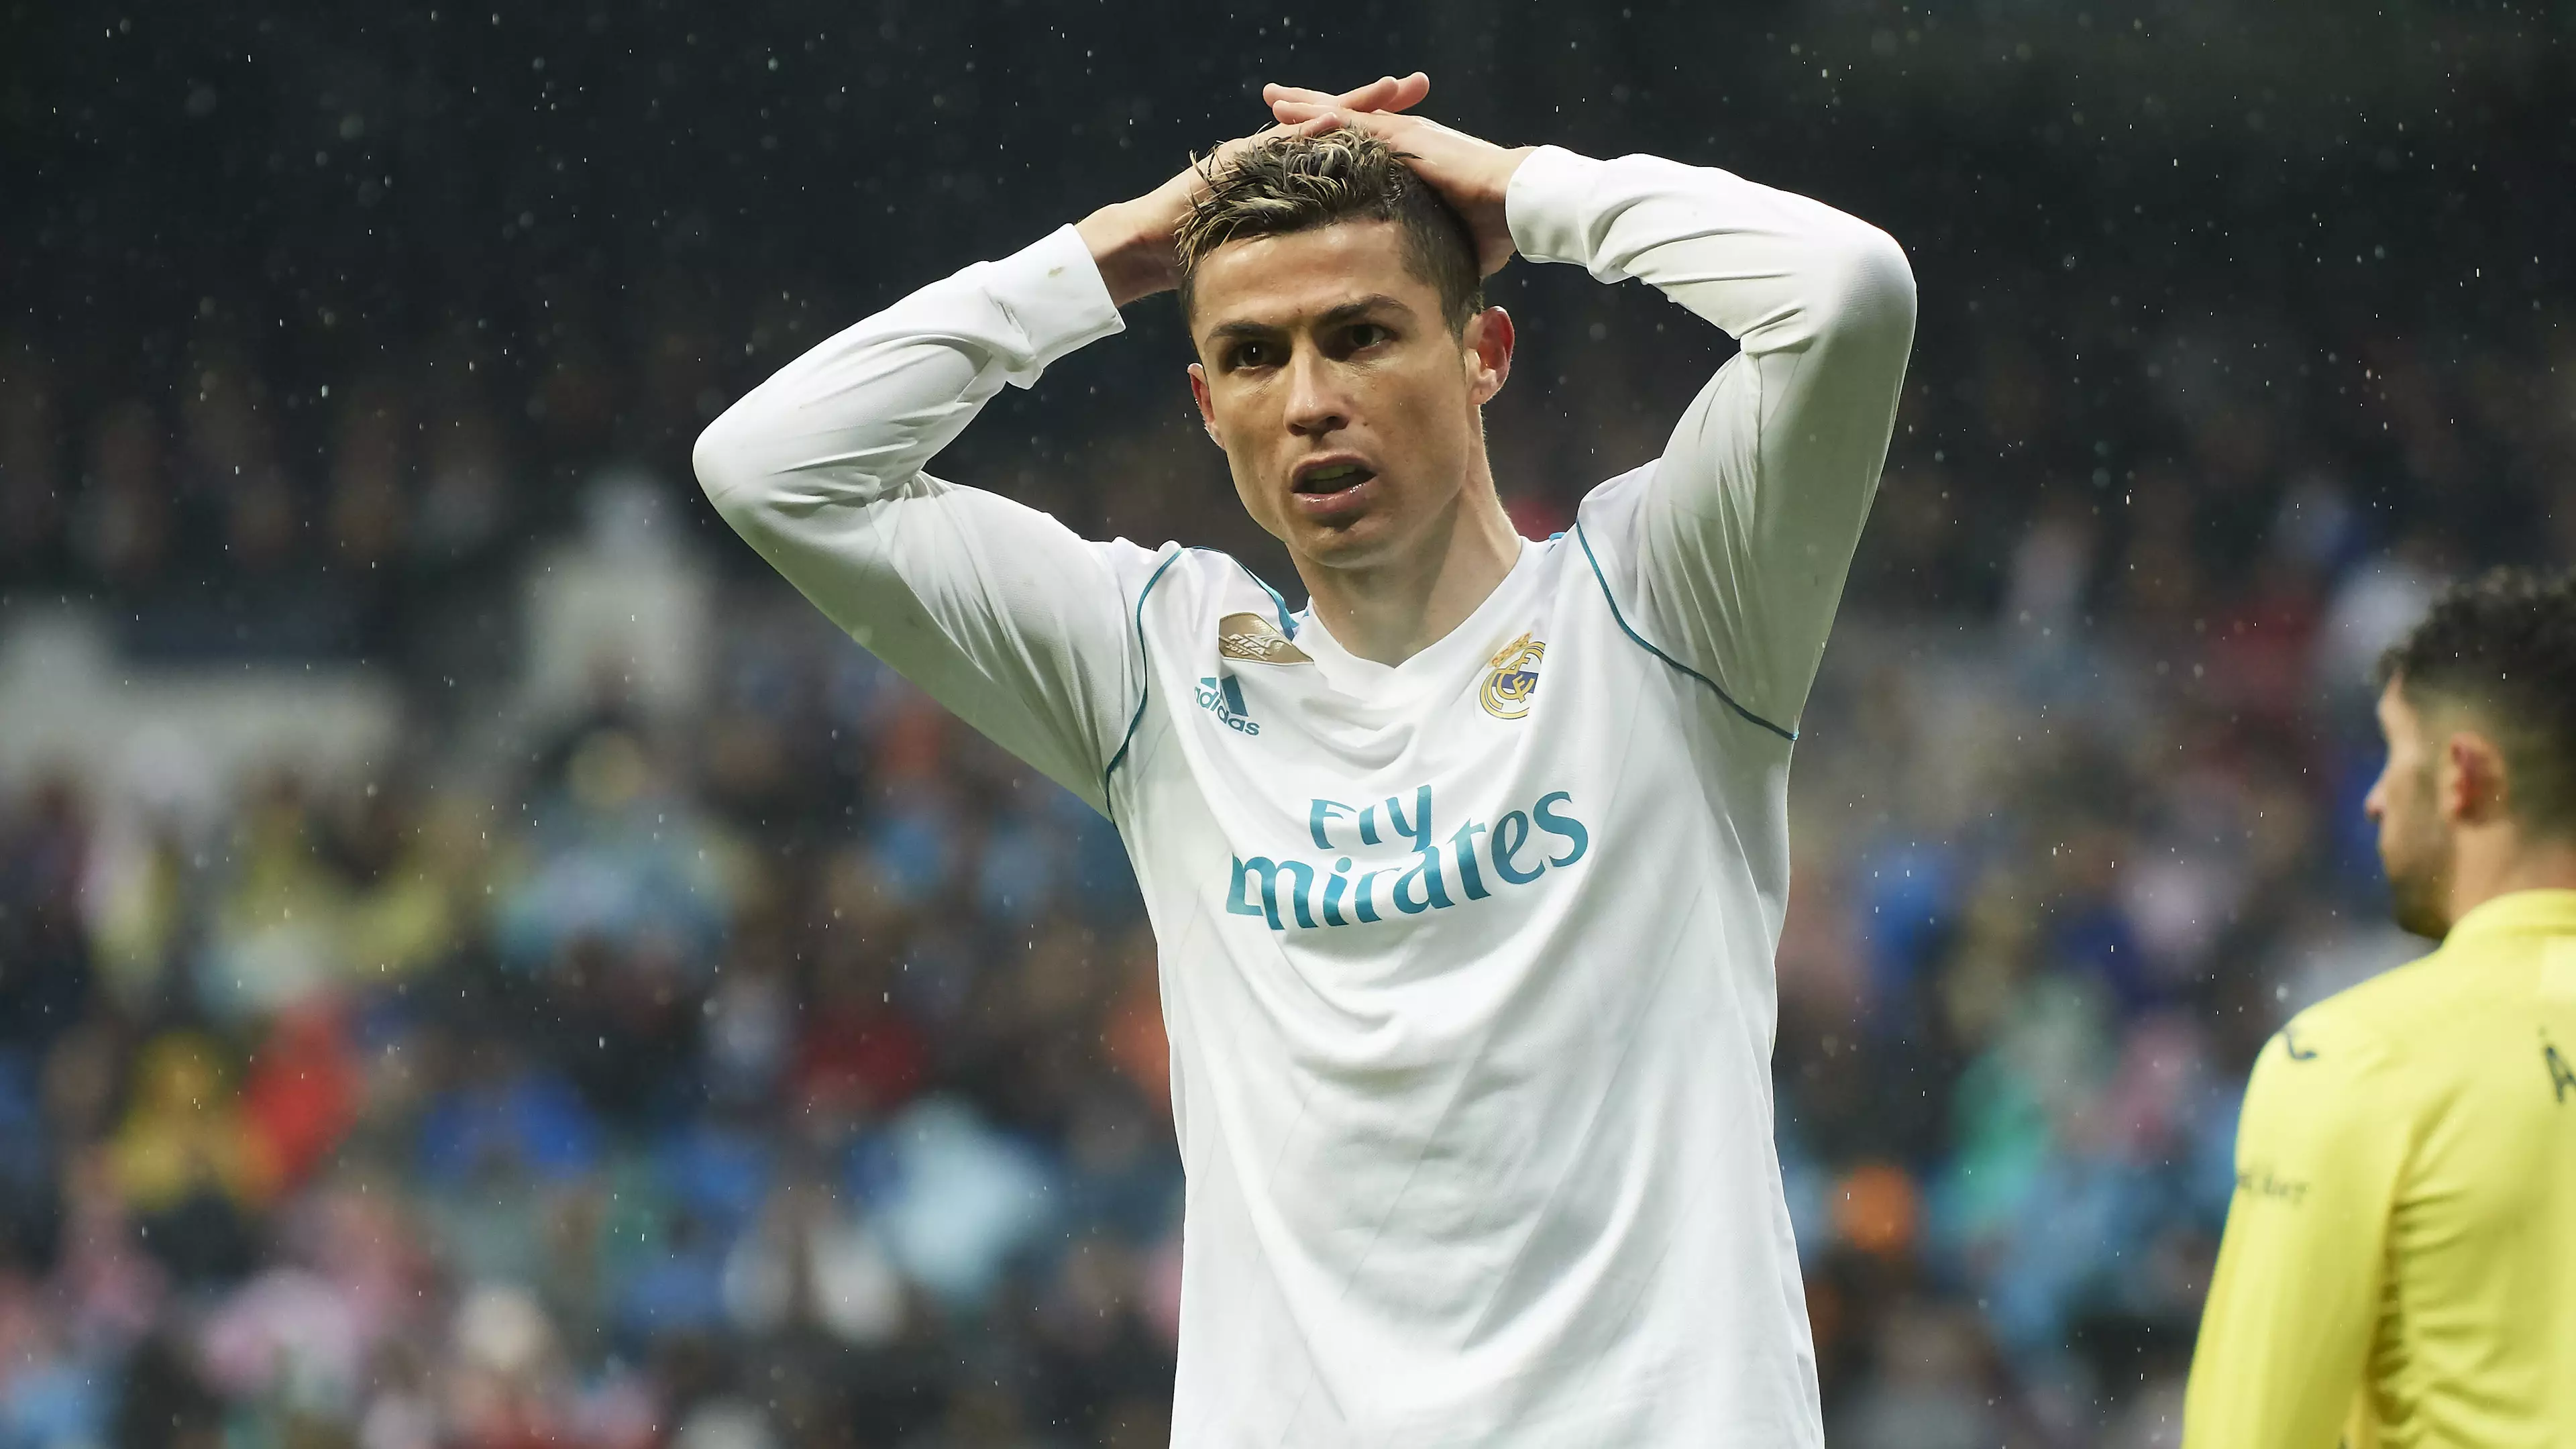 Nearly Six Million Real Fans Vote In Poll, Ronaldo's Result Is Brutal